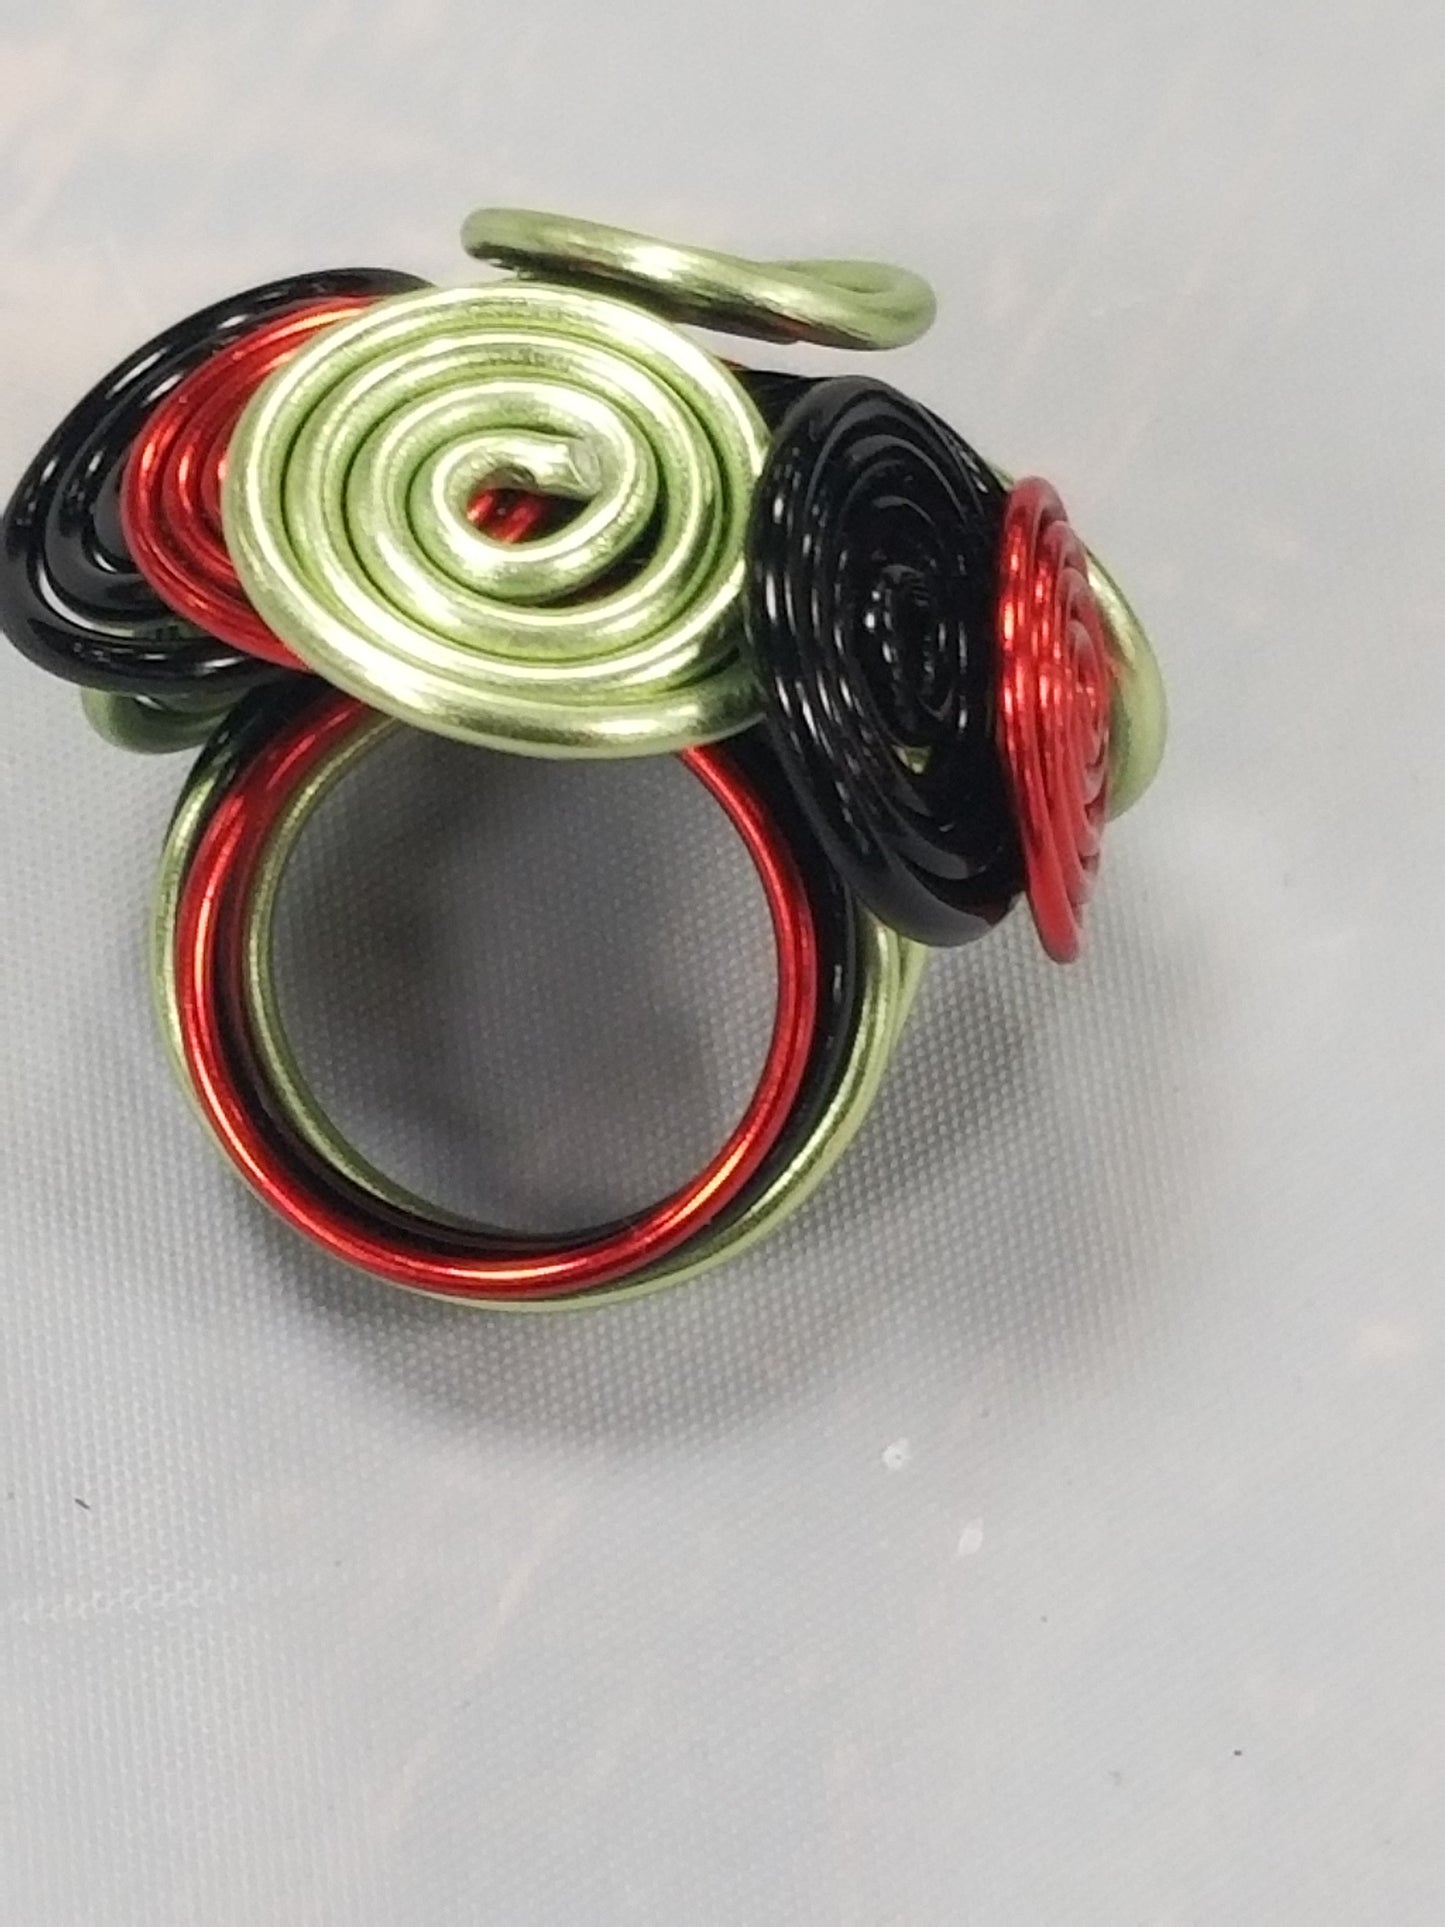 Red Black and Green Flower Swirl Ring